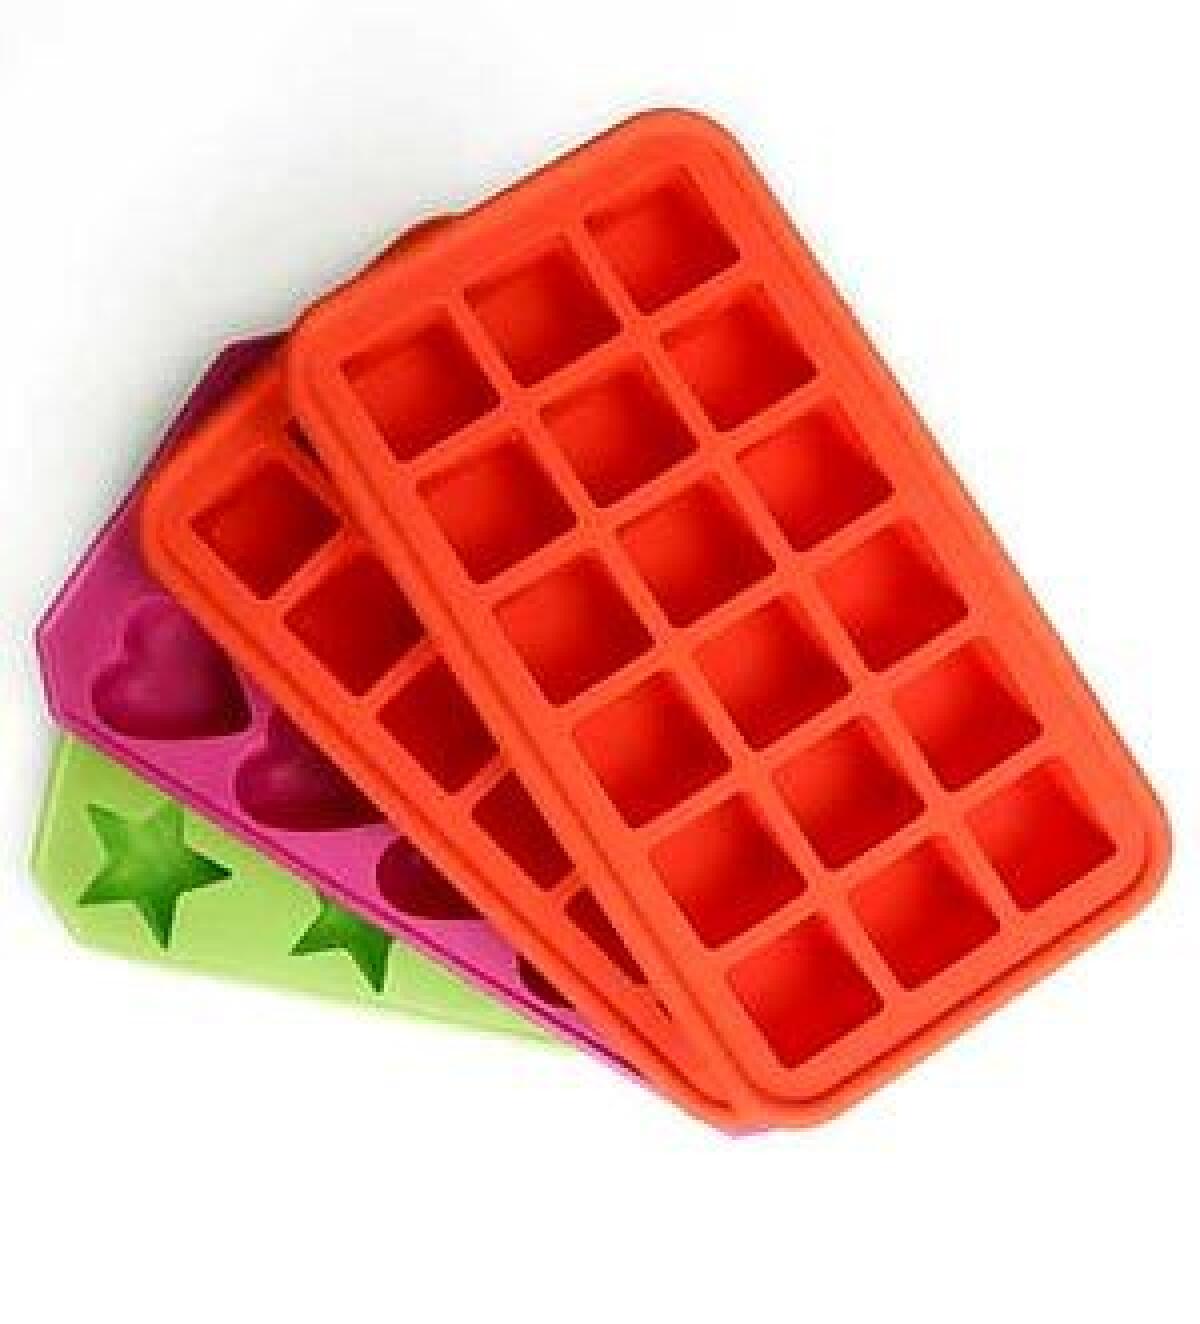 Silicone ice cube trays from various manufacturers.